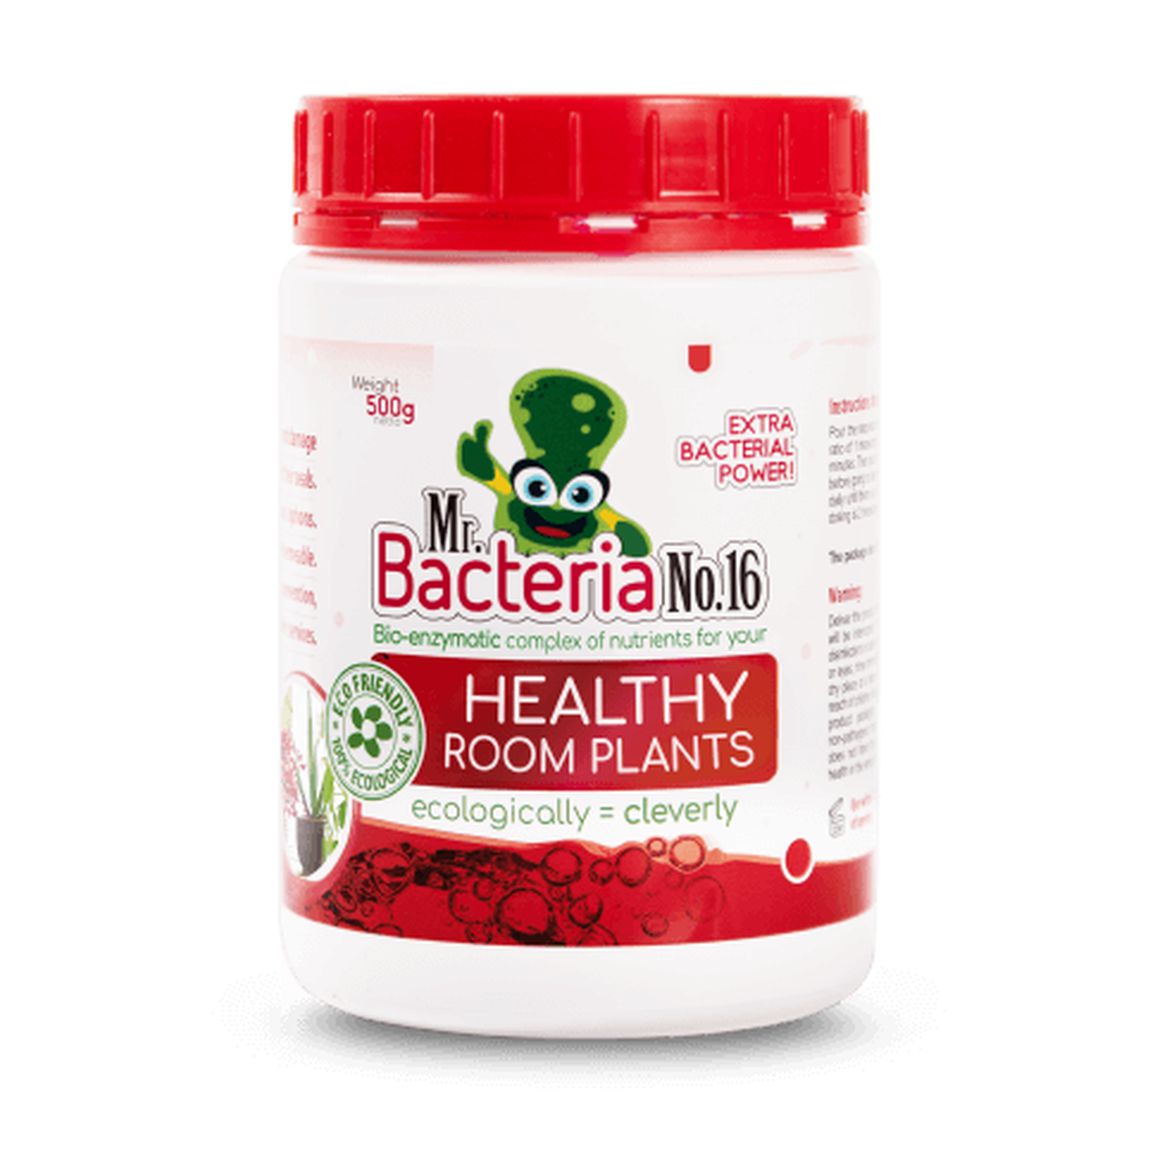 Mr. Bacteria No.16 Bio-enzymatic complex of nutrients for your